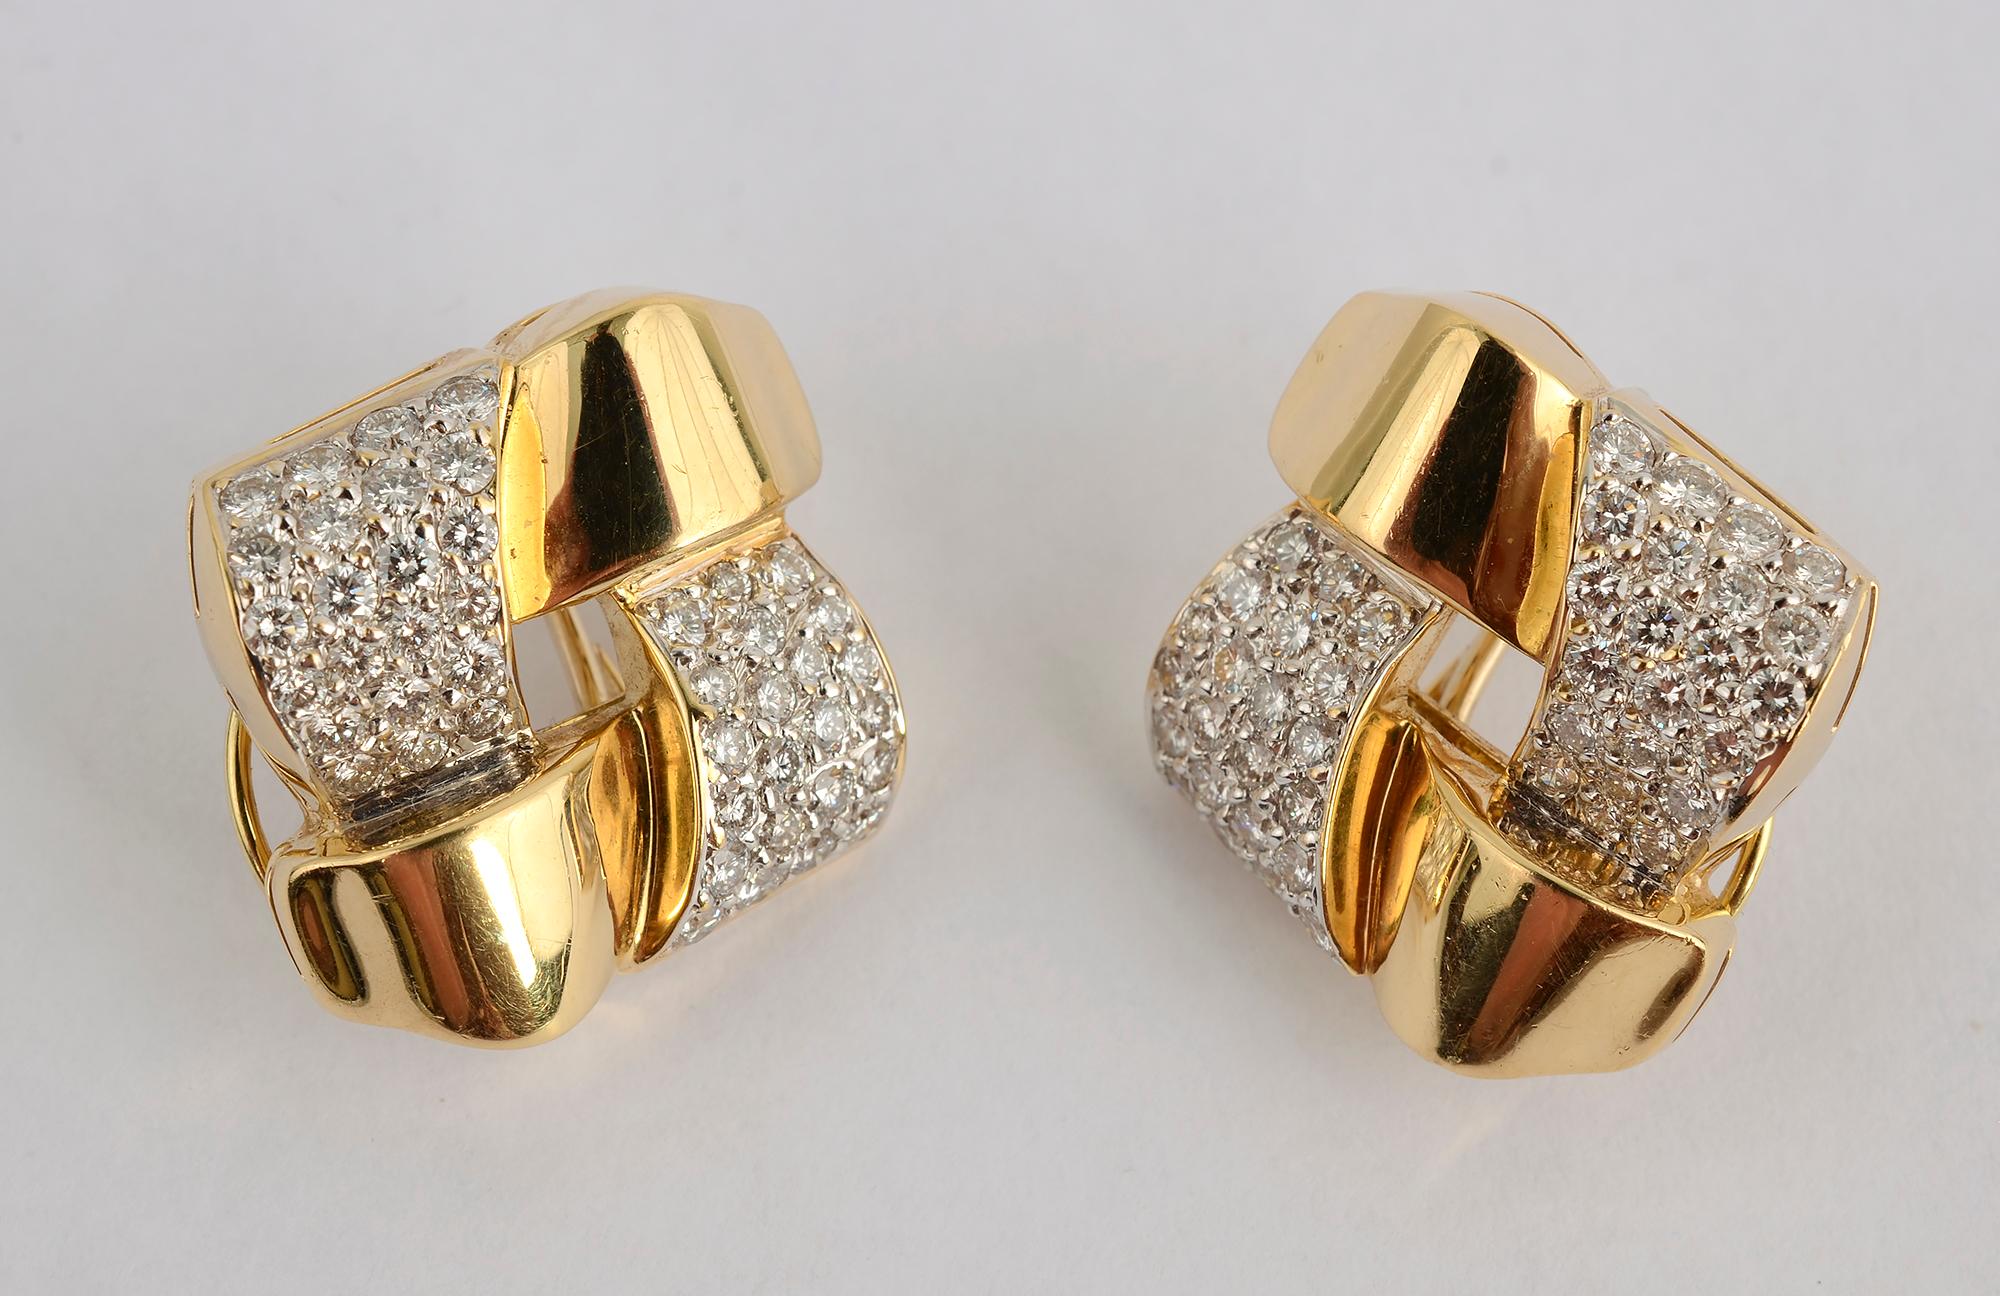 Elegant gold and diamond earrings woven in a lattice pattern.  All four arms are rounded in form to give the graceful appearance of fabric.
The earrings have 2.6 carats of diamonds that are VS quality; H color.
Backs are clips and posts.